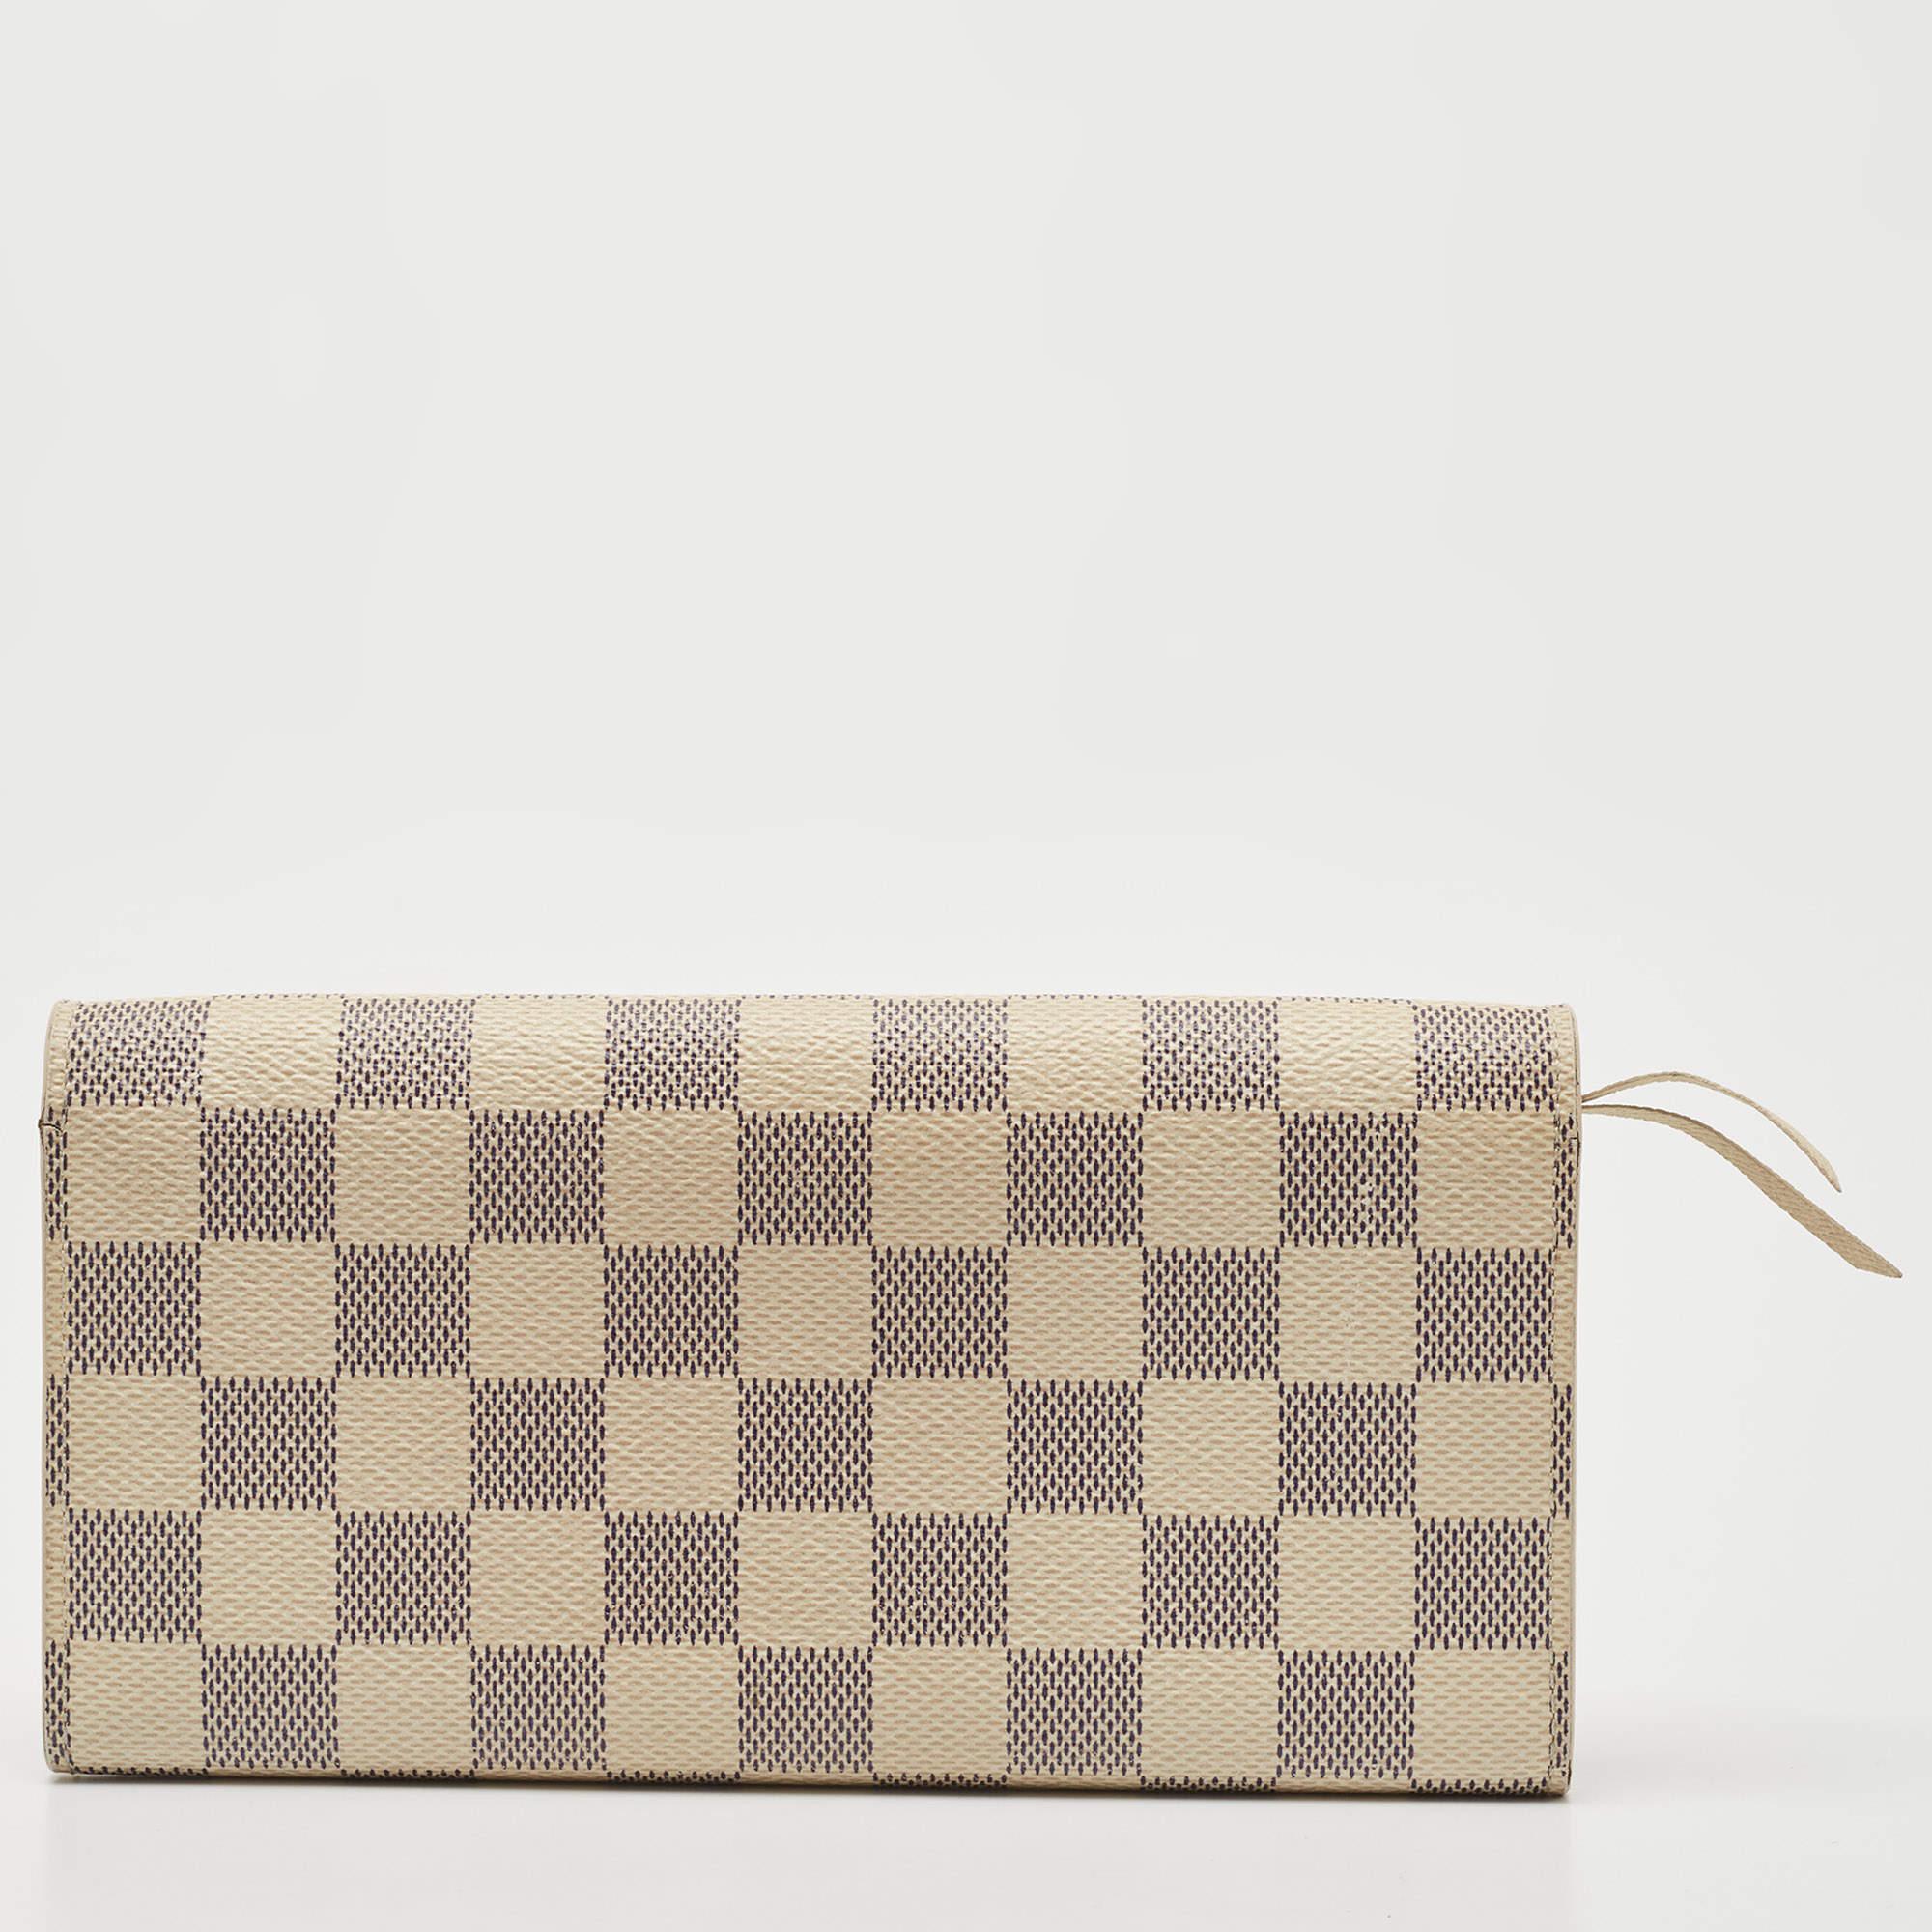 Proving that functionality and beautiful design can exist together, the Emilie wallet is elegant and perfect for daily use. Made from Damier Azur canvas, it comes with a zipper compartment and press-stud closure. Slide it into your tote or carry it